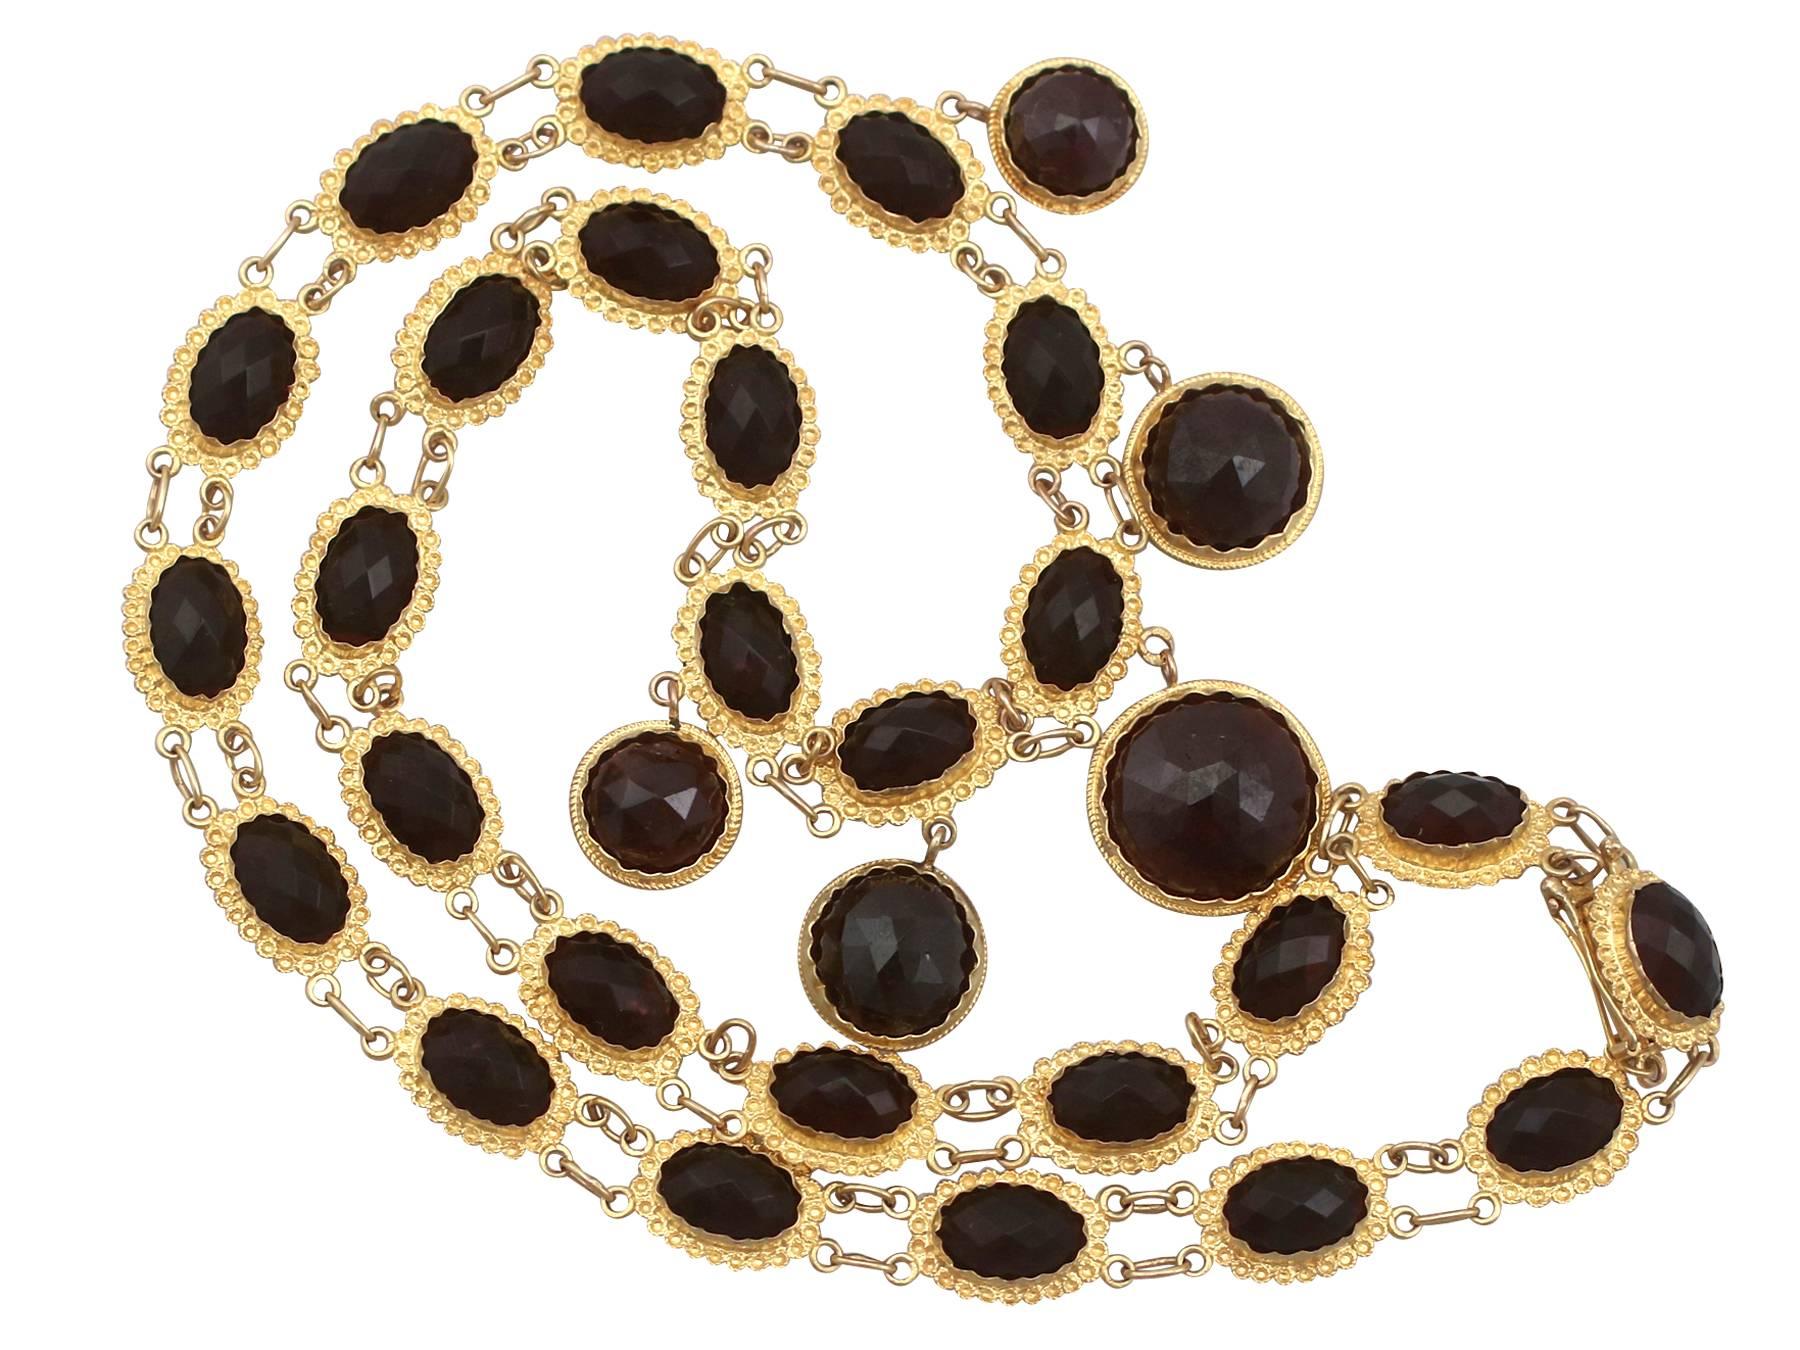 A stunning antique Victorian 49.43 carat garnet and 18 karat yellow gold necklace; part of our diverse antique jewelry and estate jewelry collections

This stunning, fine and impressive Victorian garnet necklace has been crafted in 18k yellow